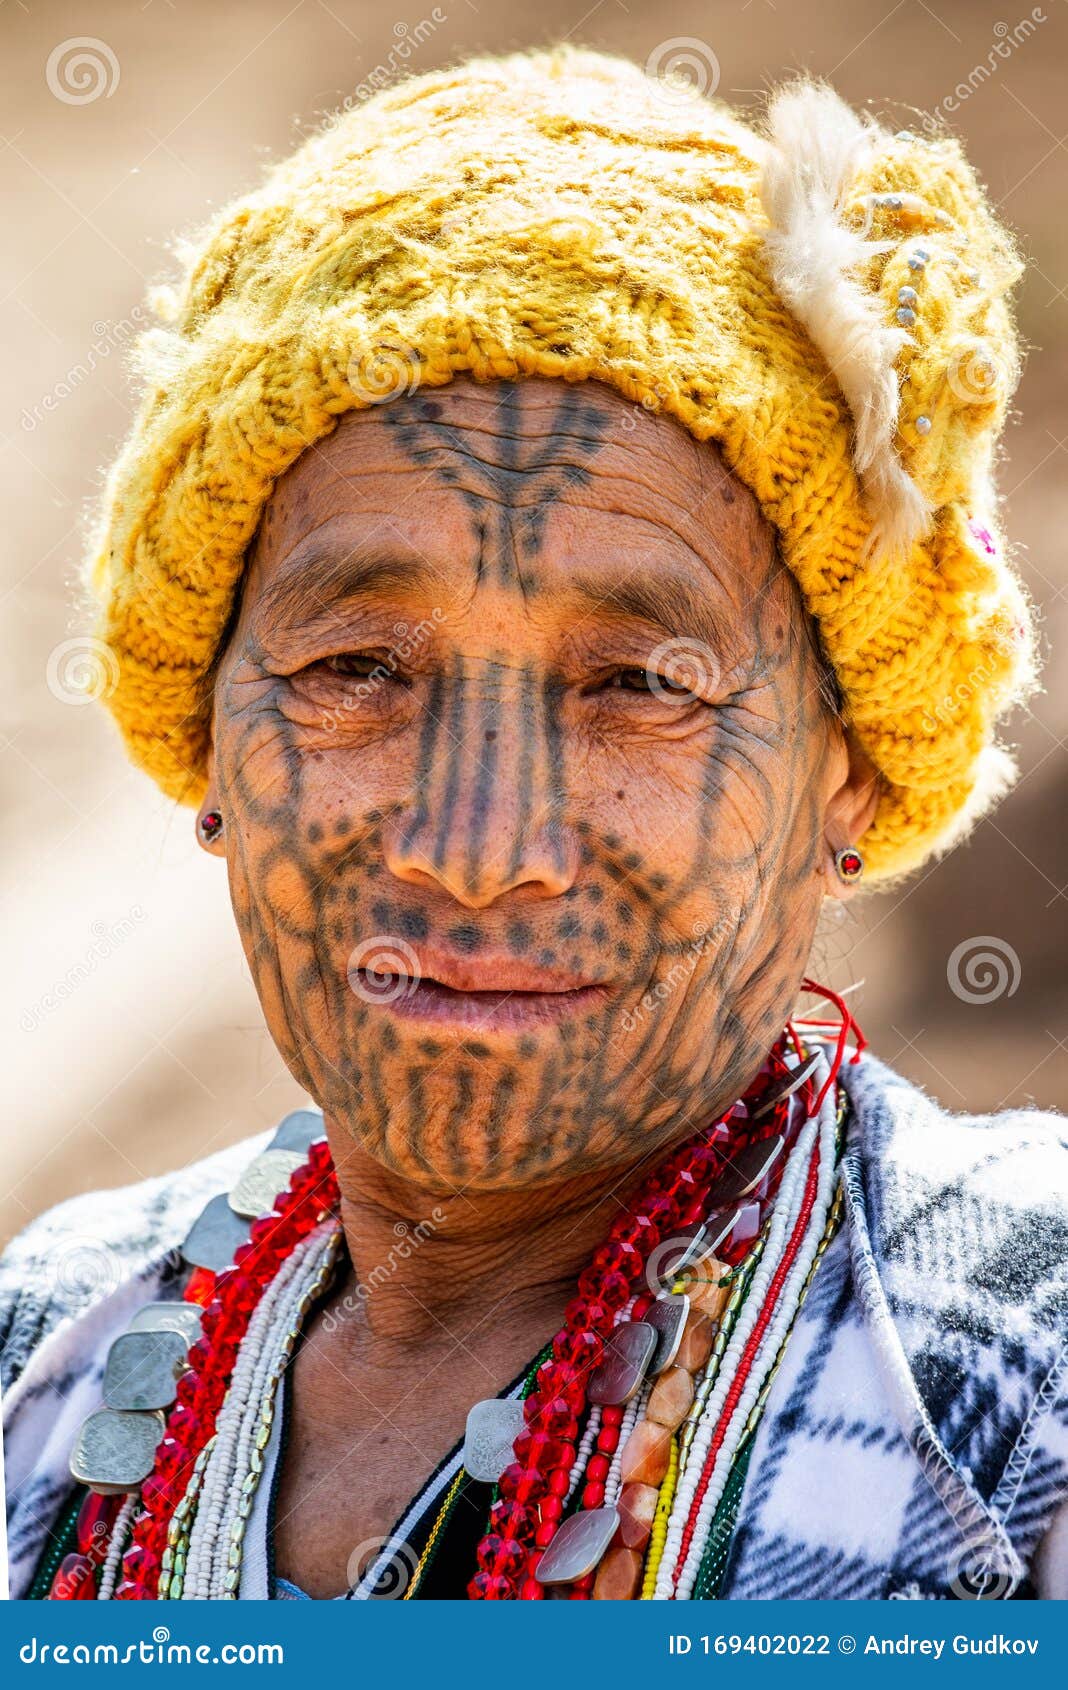 Woman with a traditional facial tattoo and ear jewelry ethnic group of the  Chin ethnic minority Stock Photo Picture And Rights Managed Image Pic  IBR3896171  agefotostock